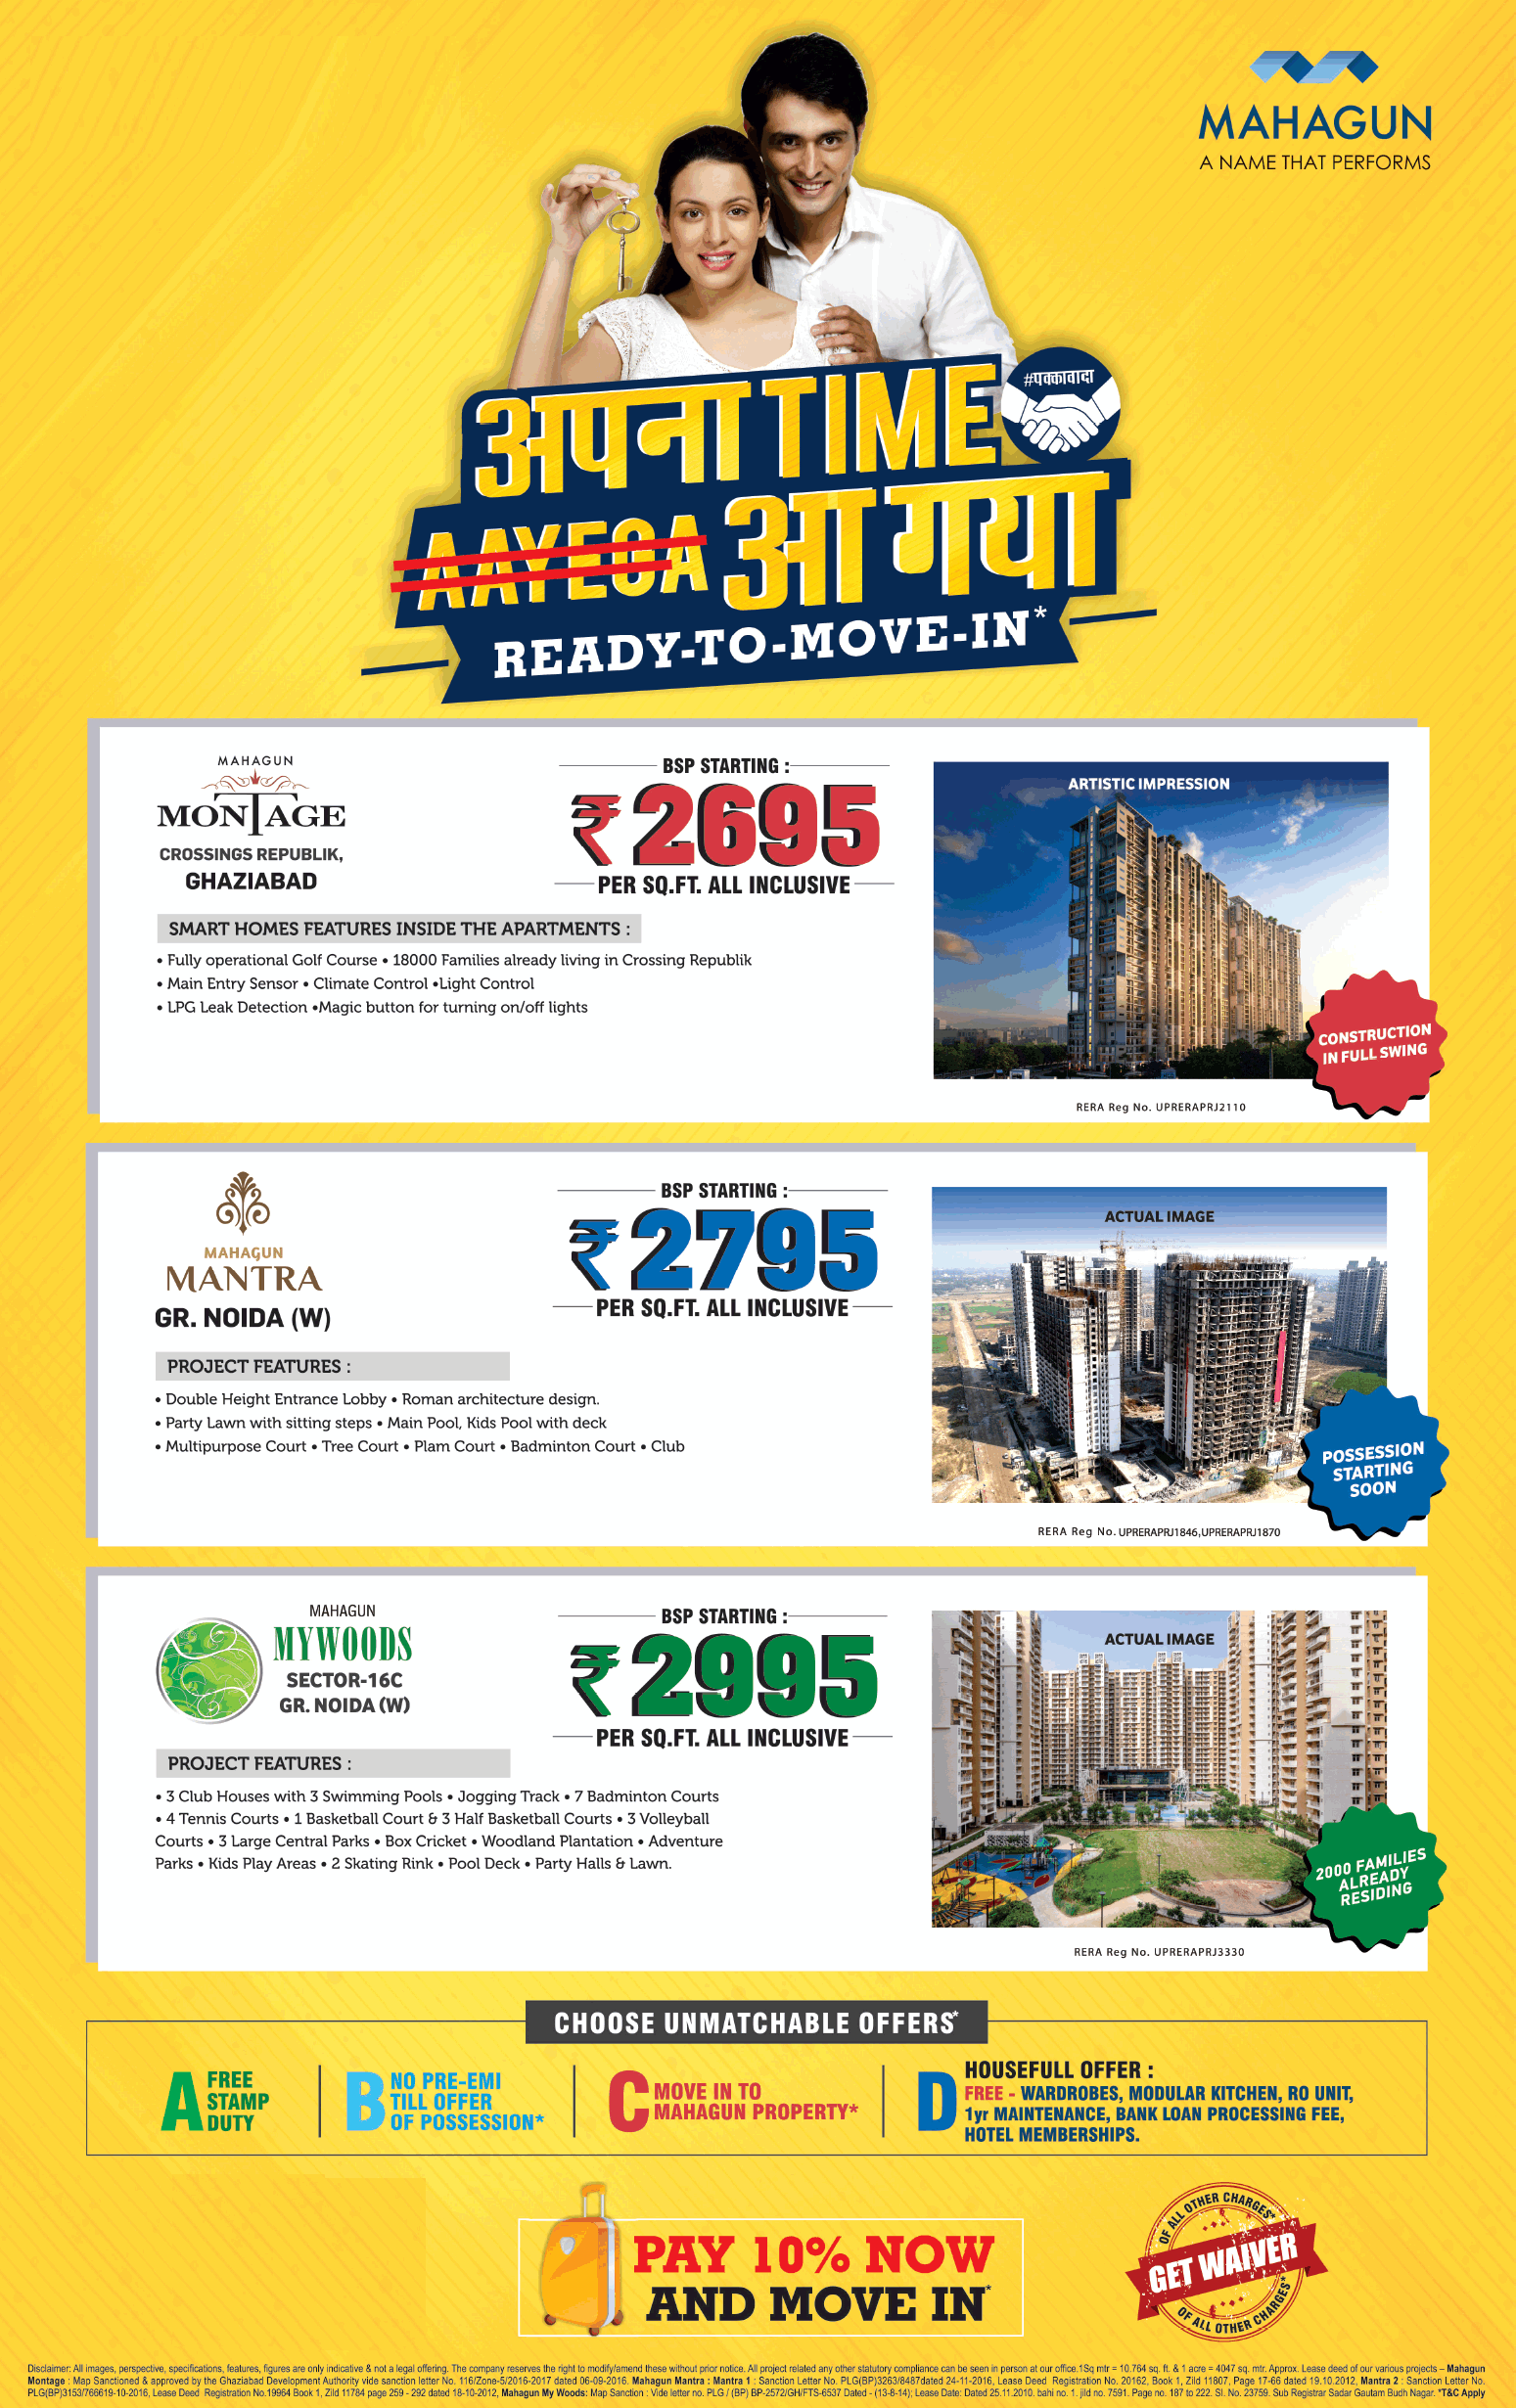 Pay no Pre EMI till date of possession at Mahagun Projects in Greater Noida Update